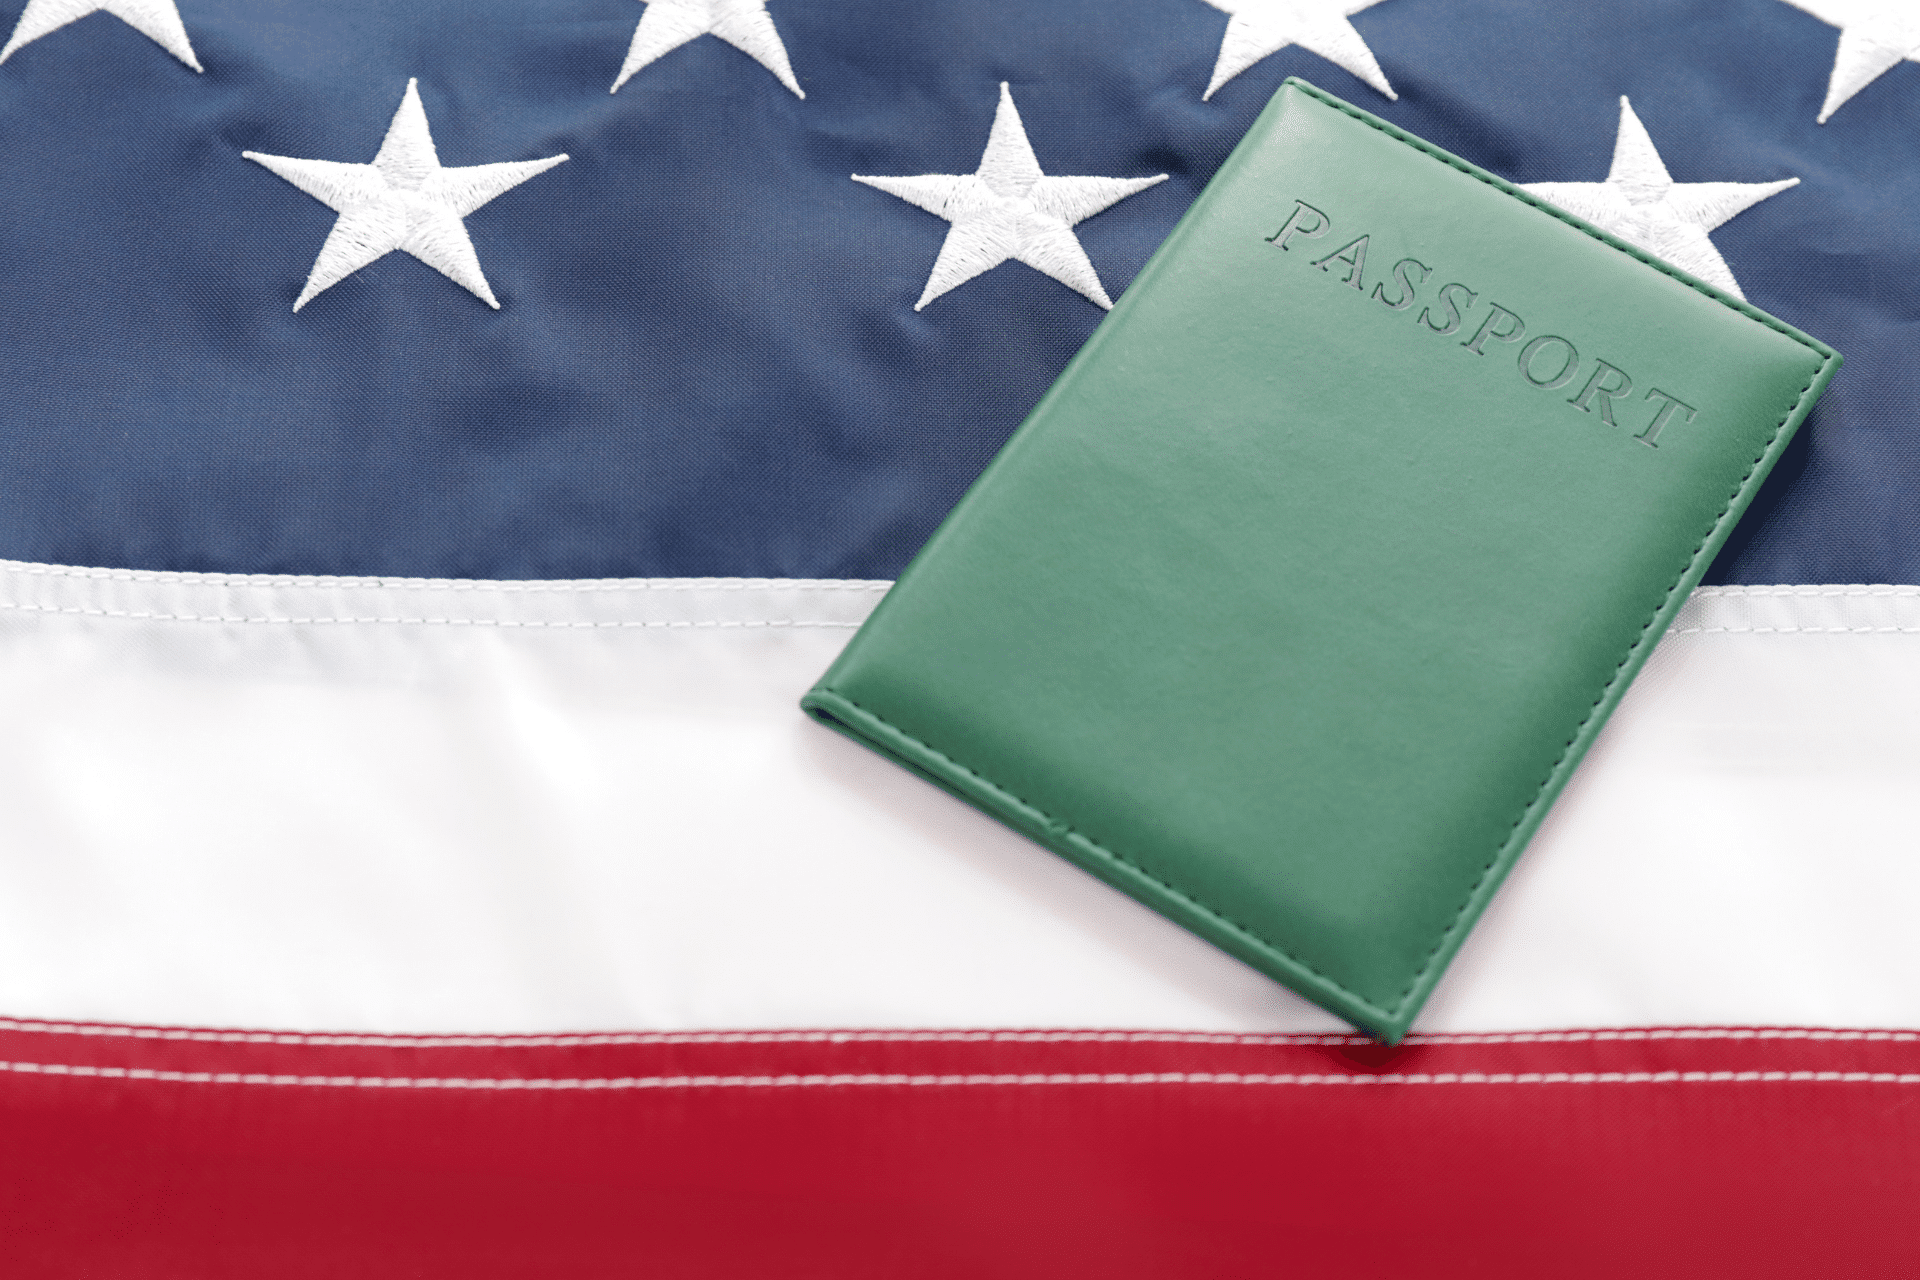 passport holder placed on the US flag